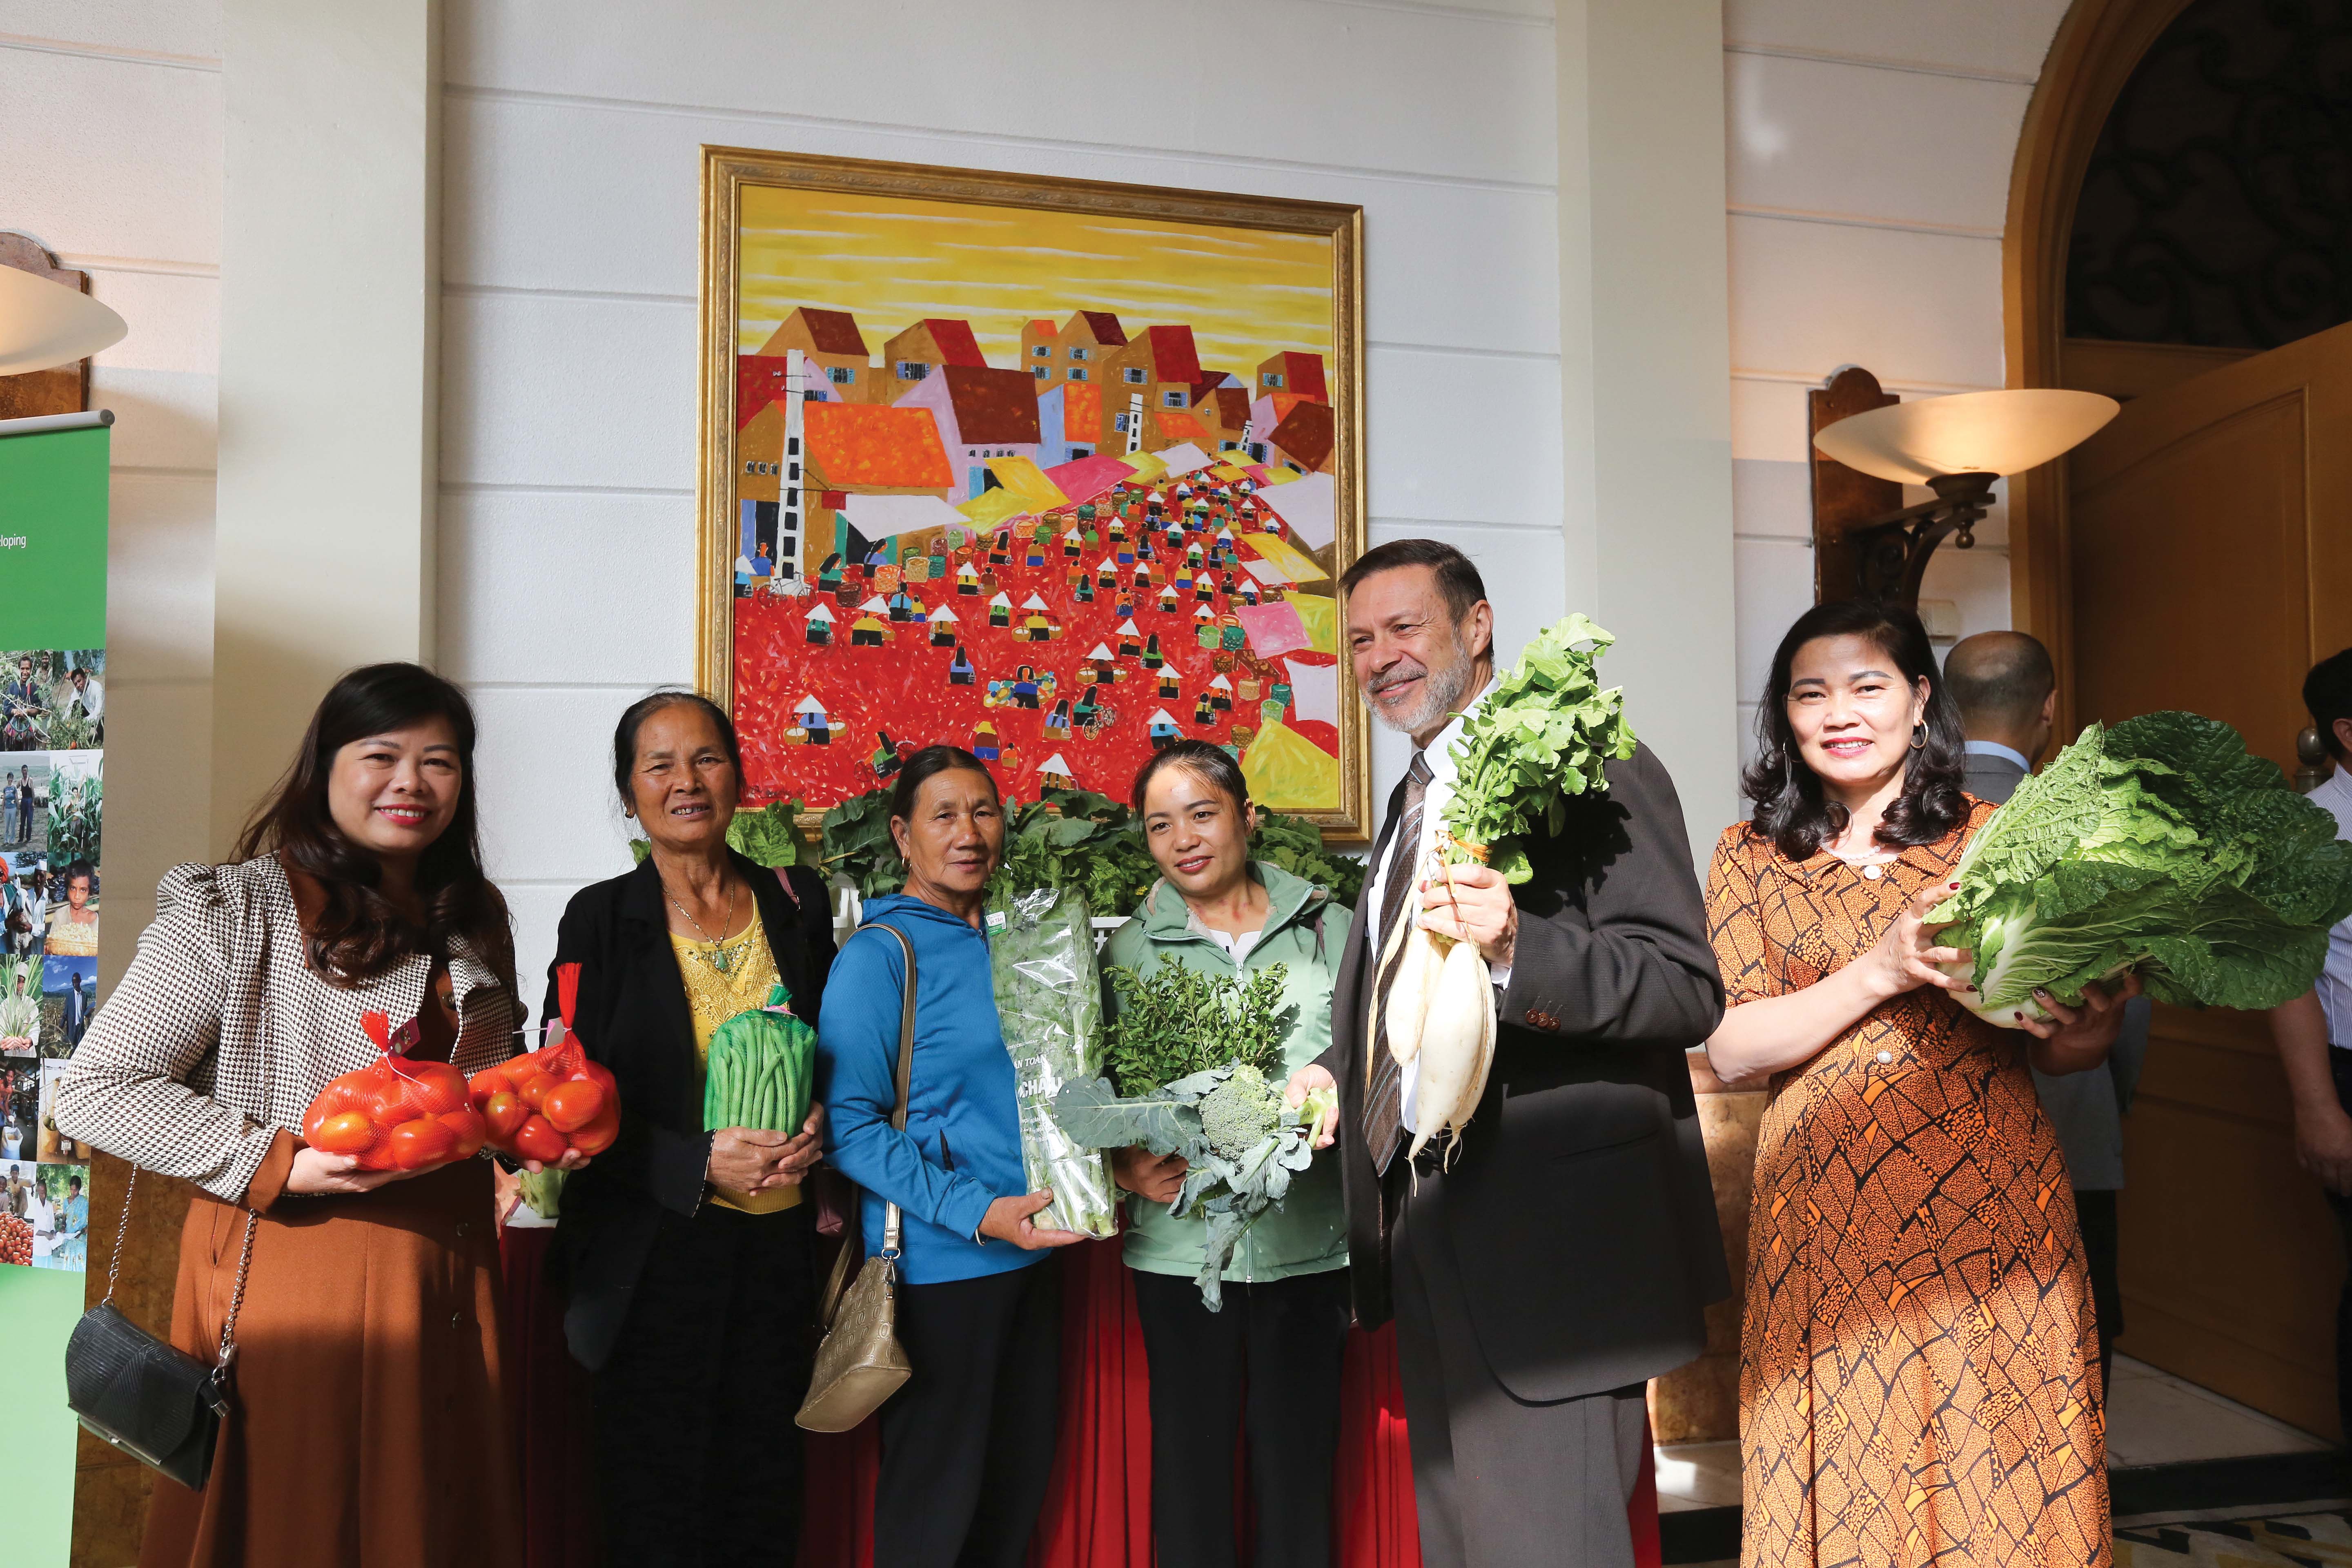 a group of women and a man standing in front of a colourful painting. They each hold a different vegetable, and pose for the photo.